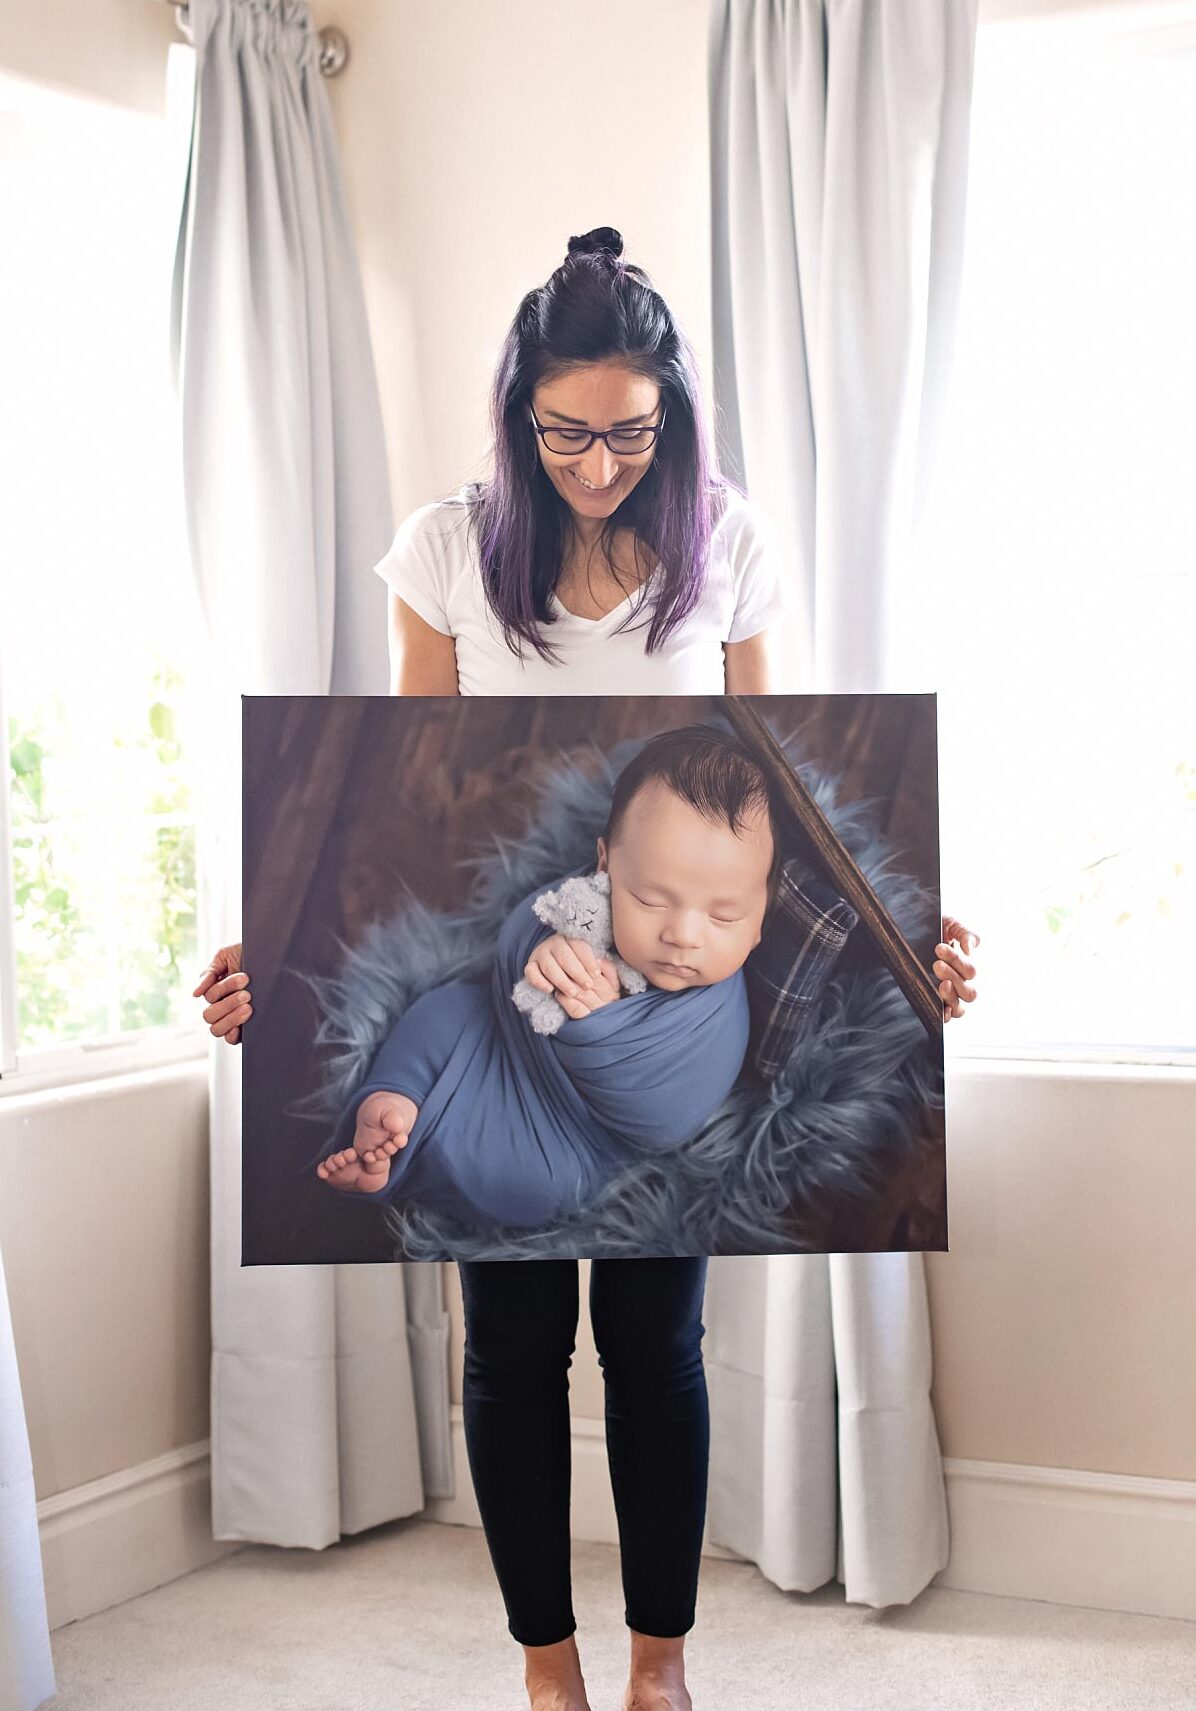 Coachella Valley Newborn baby photographer Melissa Landres with printed canvas of new baby 